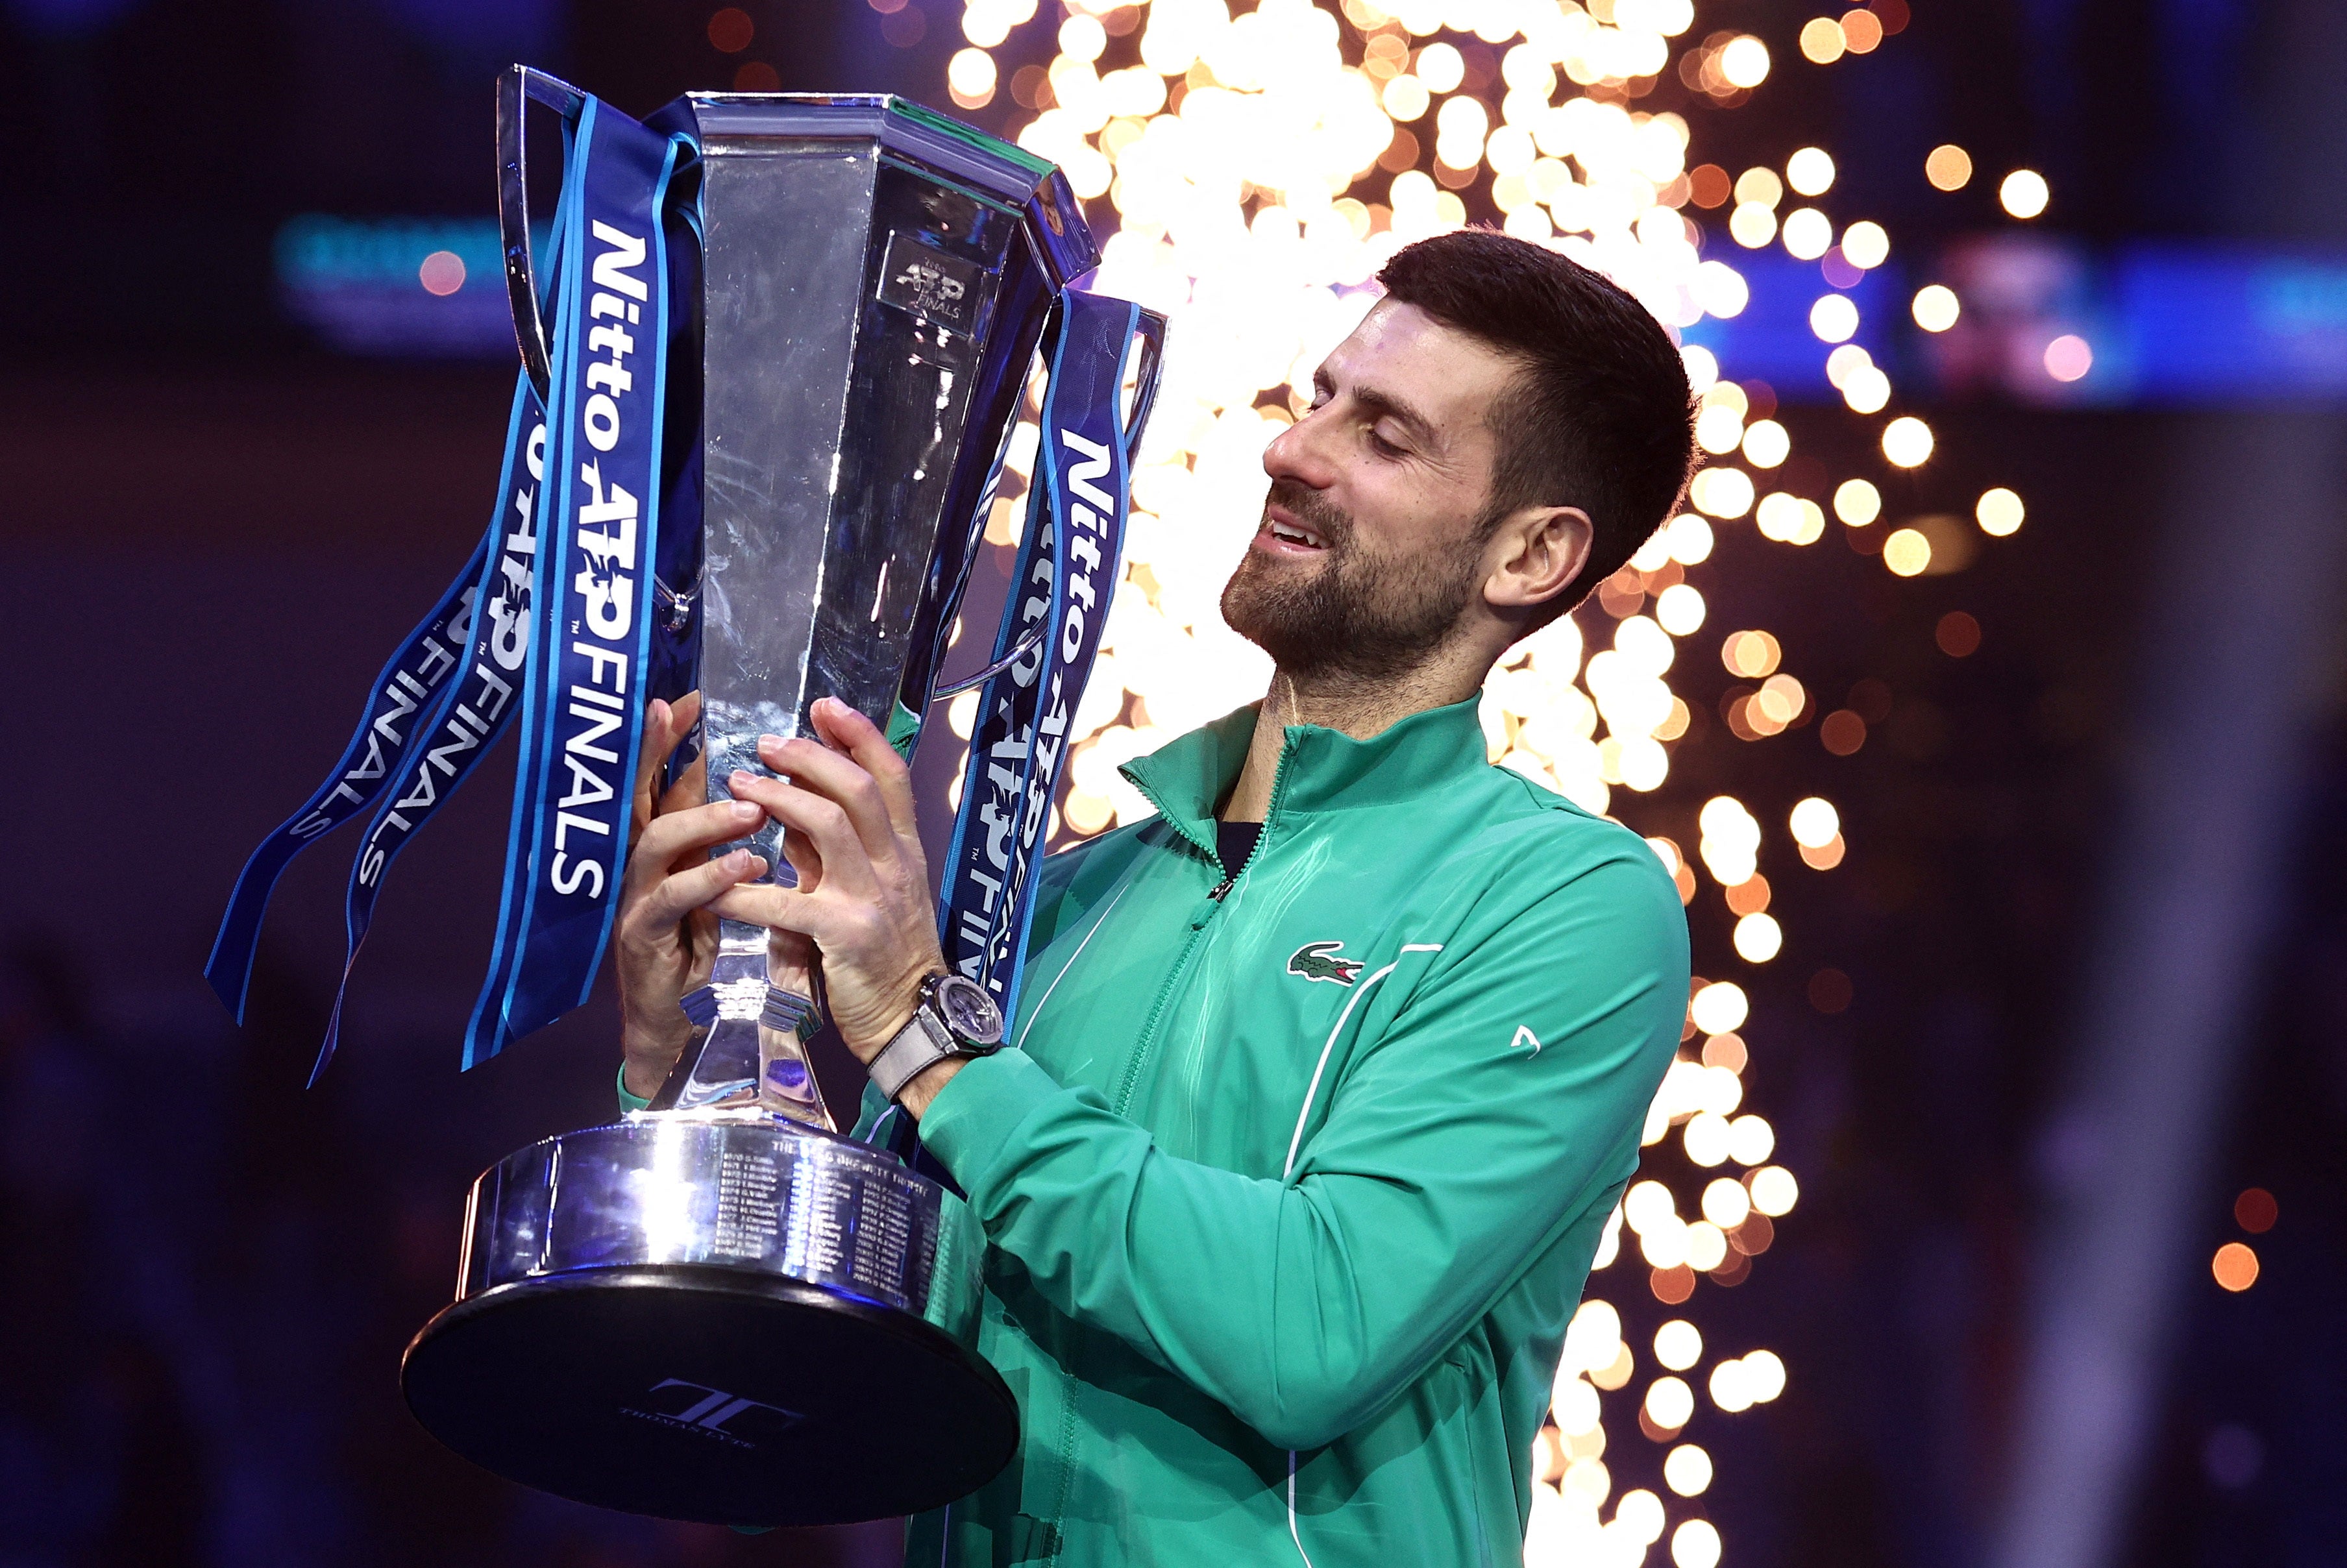 With his win on Sunday, Djokovic surpassed Roger Federer’s ATP Finals record